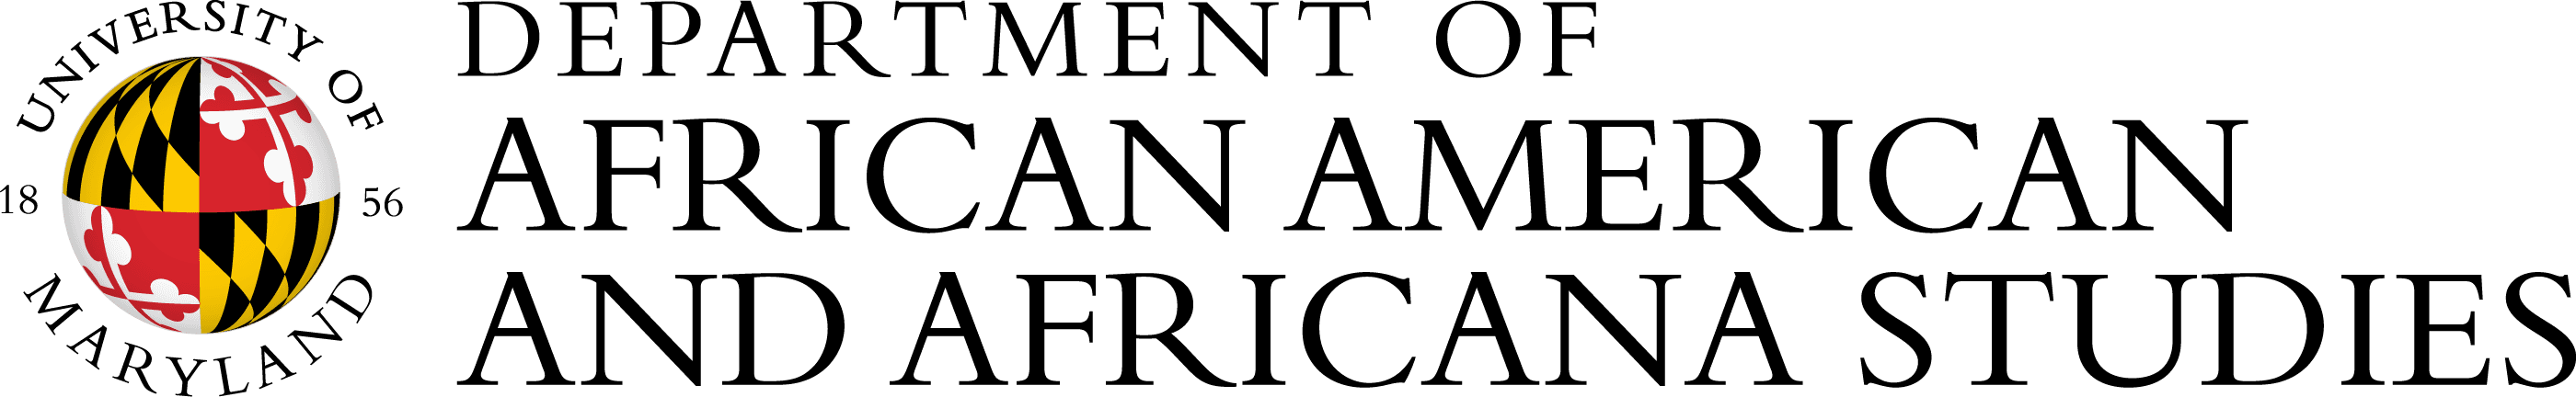 Department of African American and Africana Studies